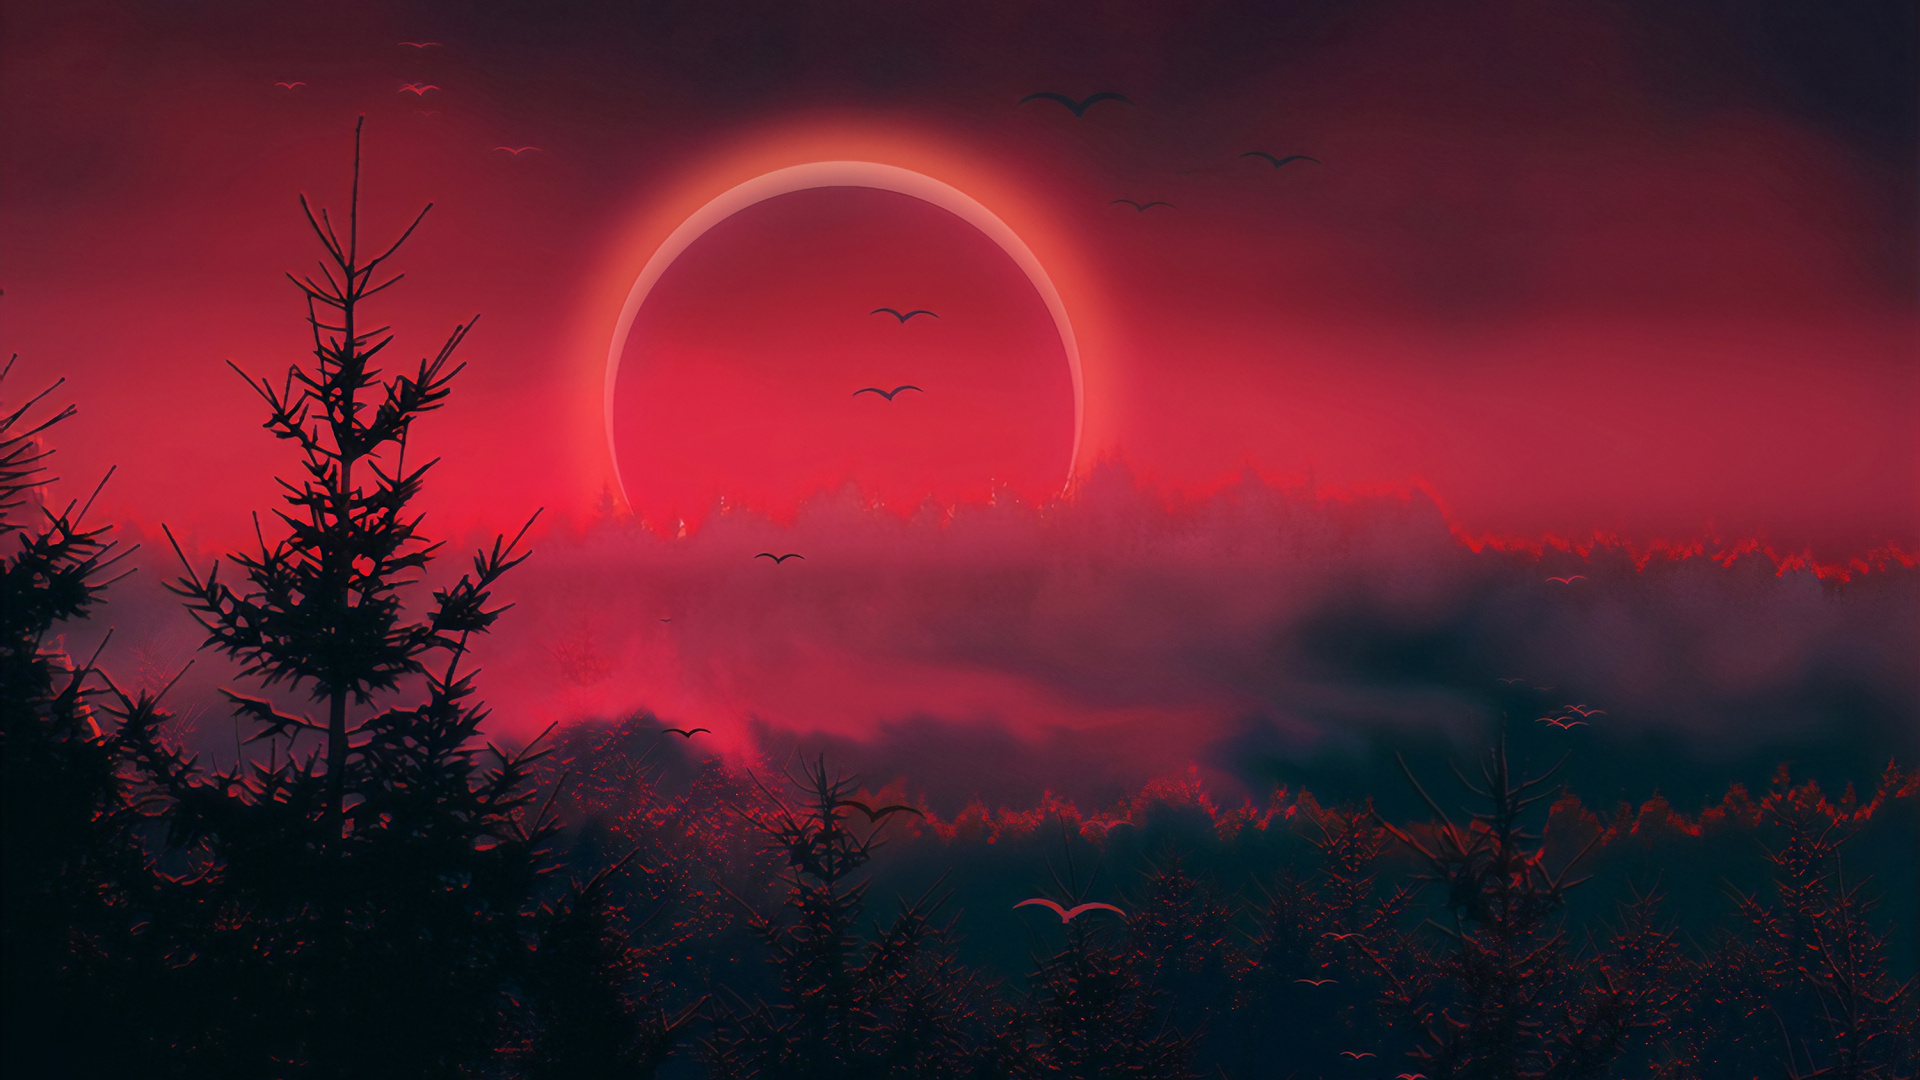 Red, Celestial Event, Atmosphere, Night, Tree. Wallpaper in 1920x1080 Resolution